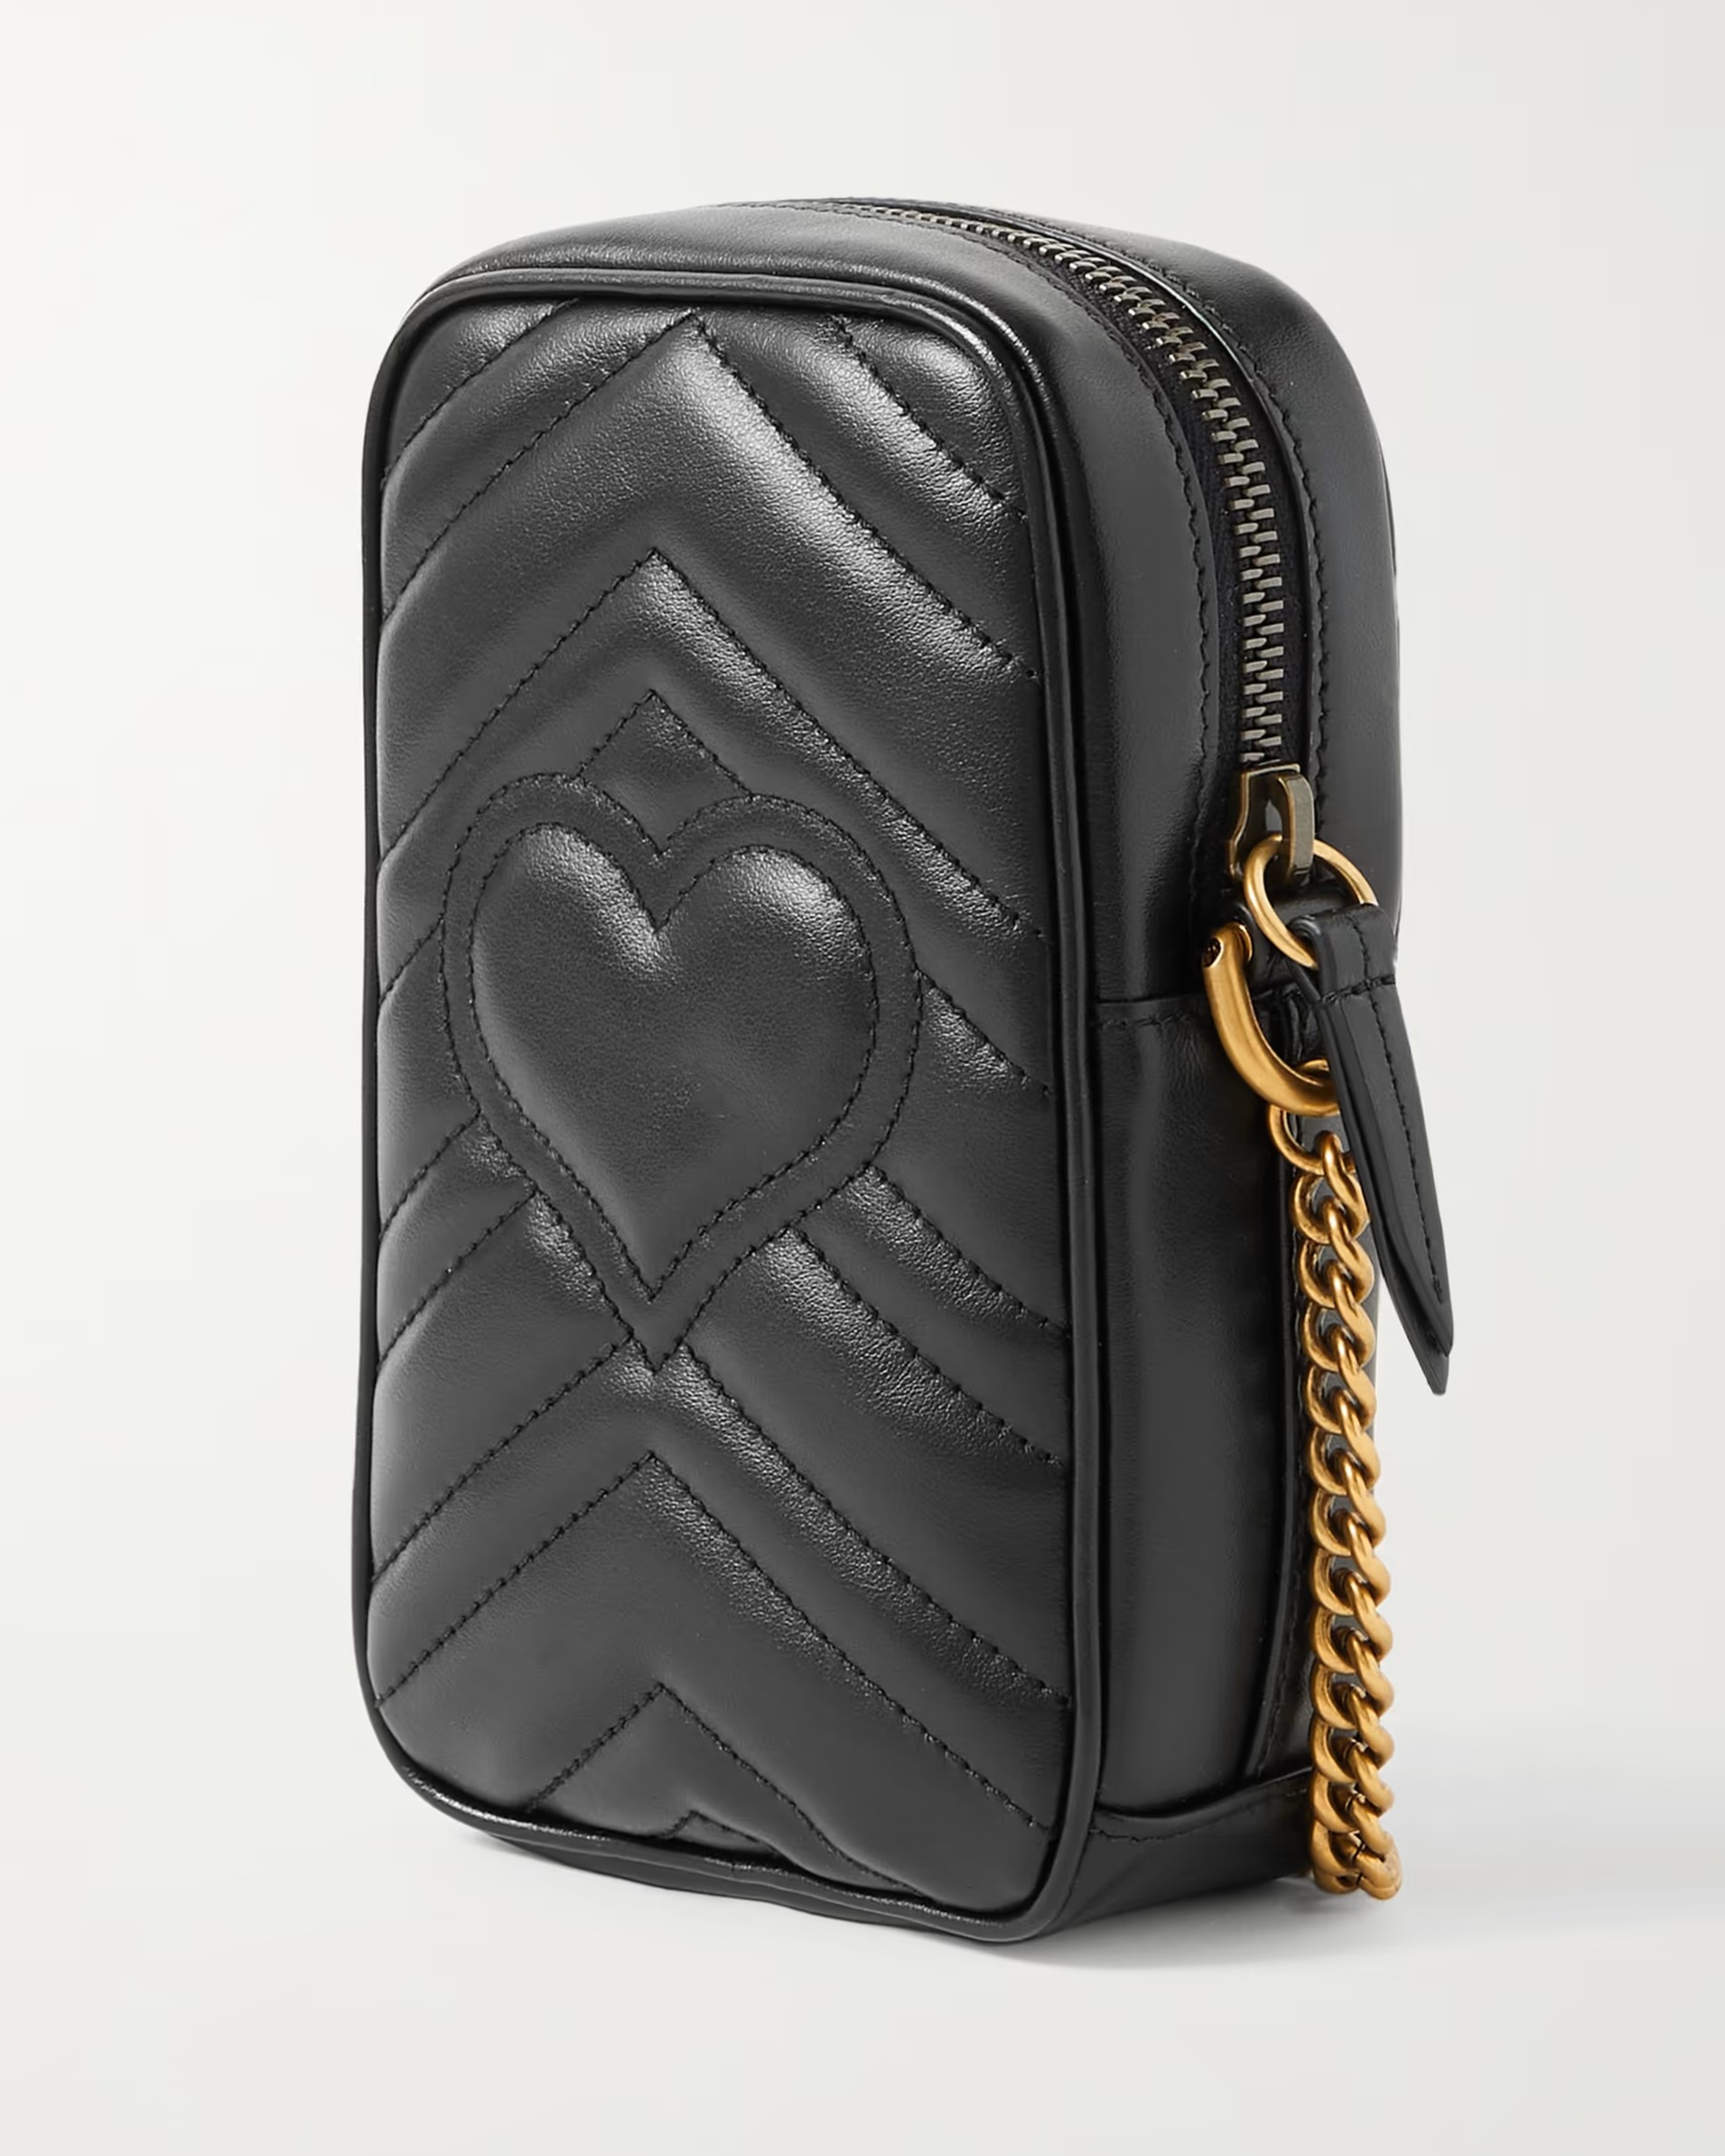 TÚI NỮ ĐEO ĐIỆN THOẠI GUCCI GG MARMONT MINI BLACK QUILTED LEATHER POUCH 5